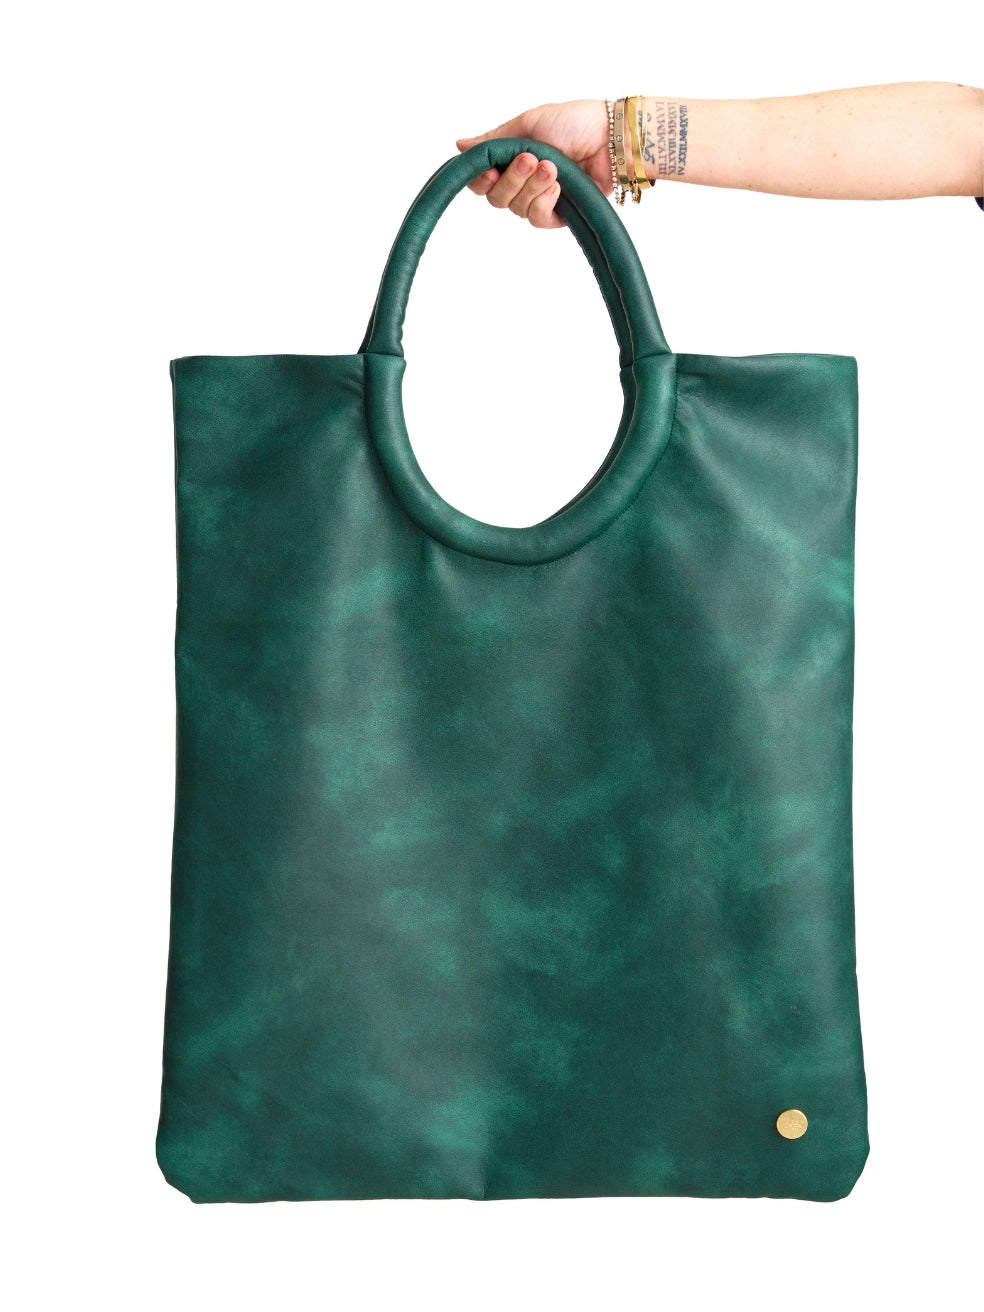 24 Hour Tote Work Travel Bag Oversized Animal-Free Leather Pine Green Distressed